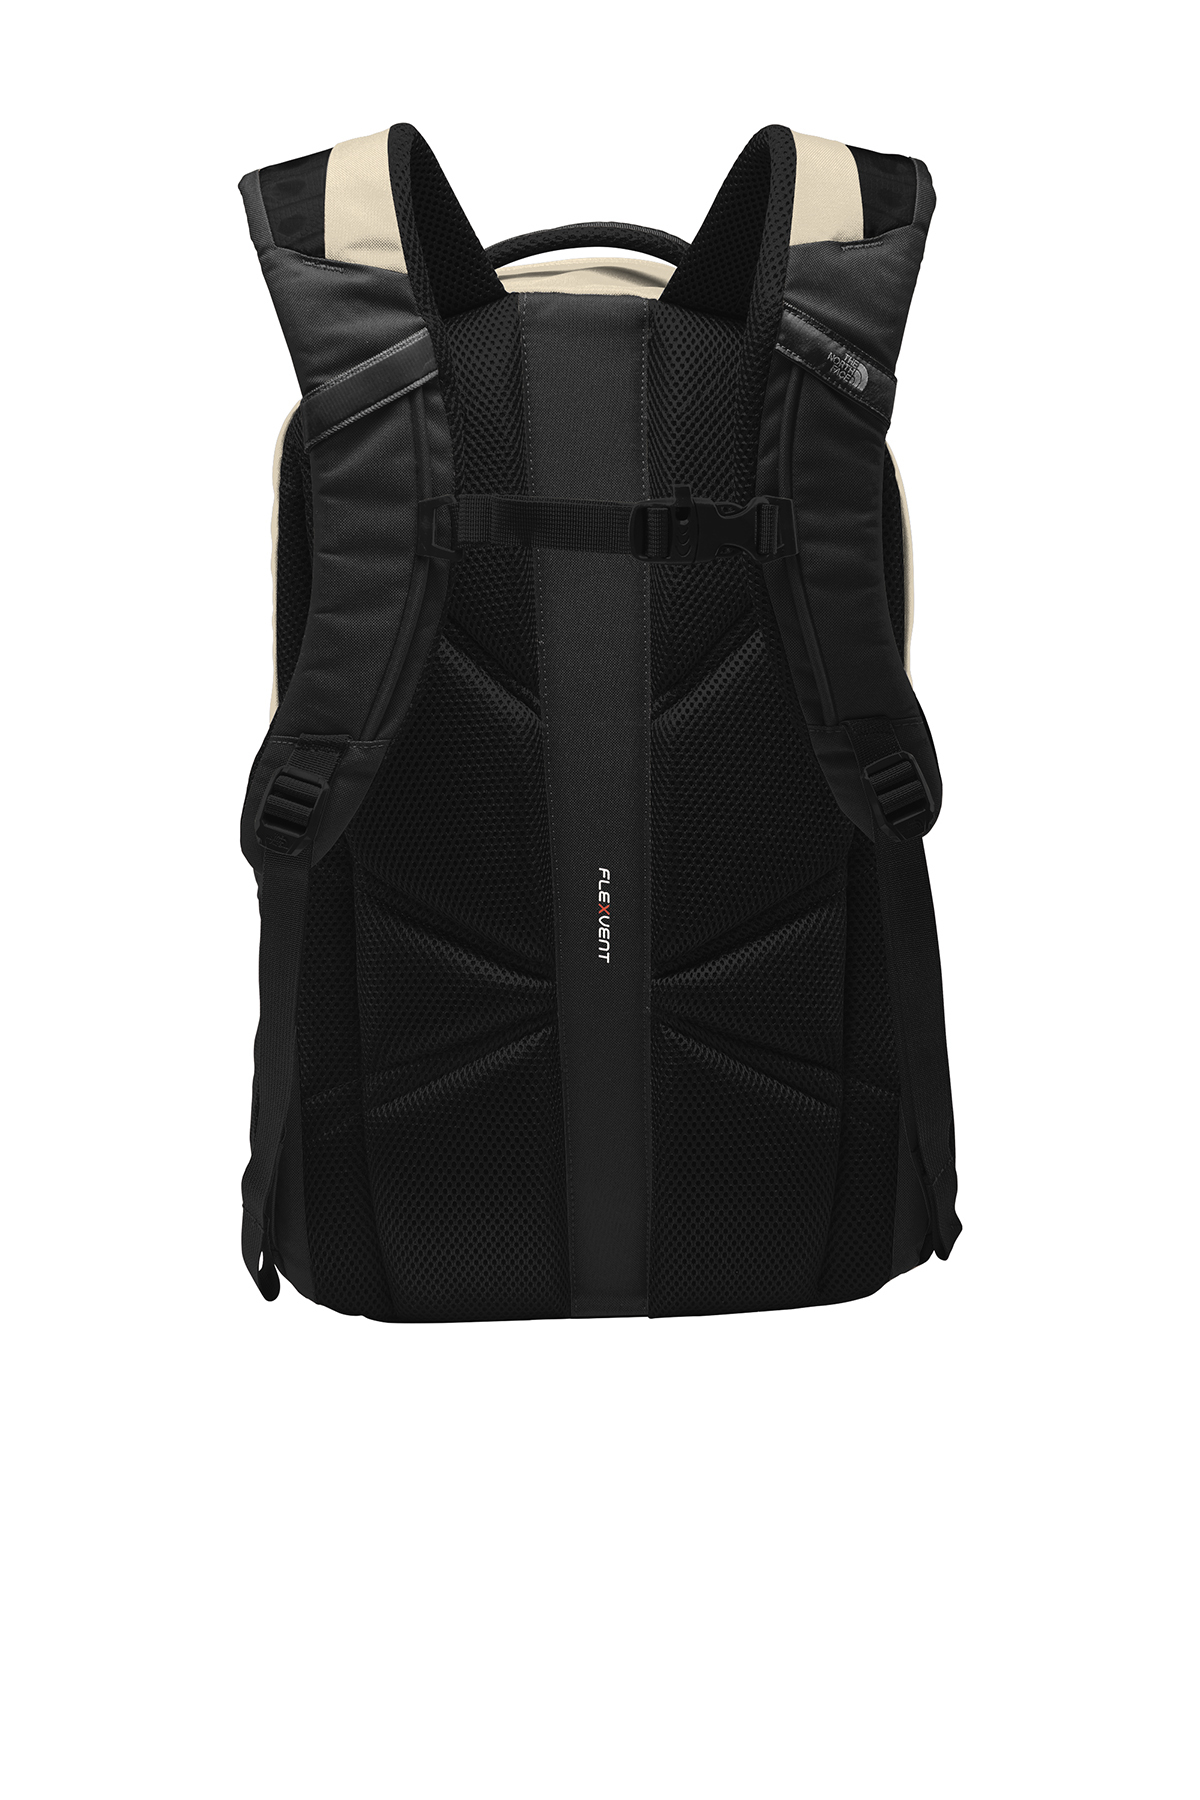 The North Face Groundwork Backpack | Product | SanMar